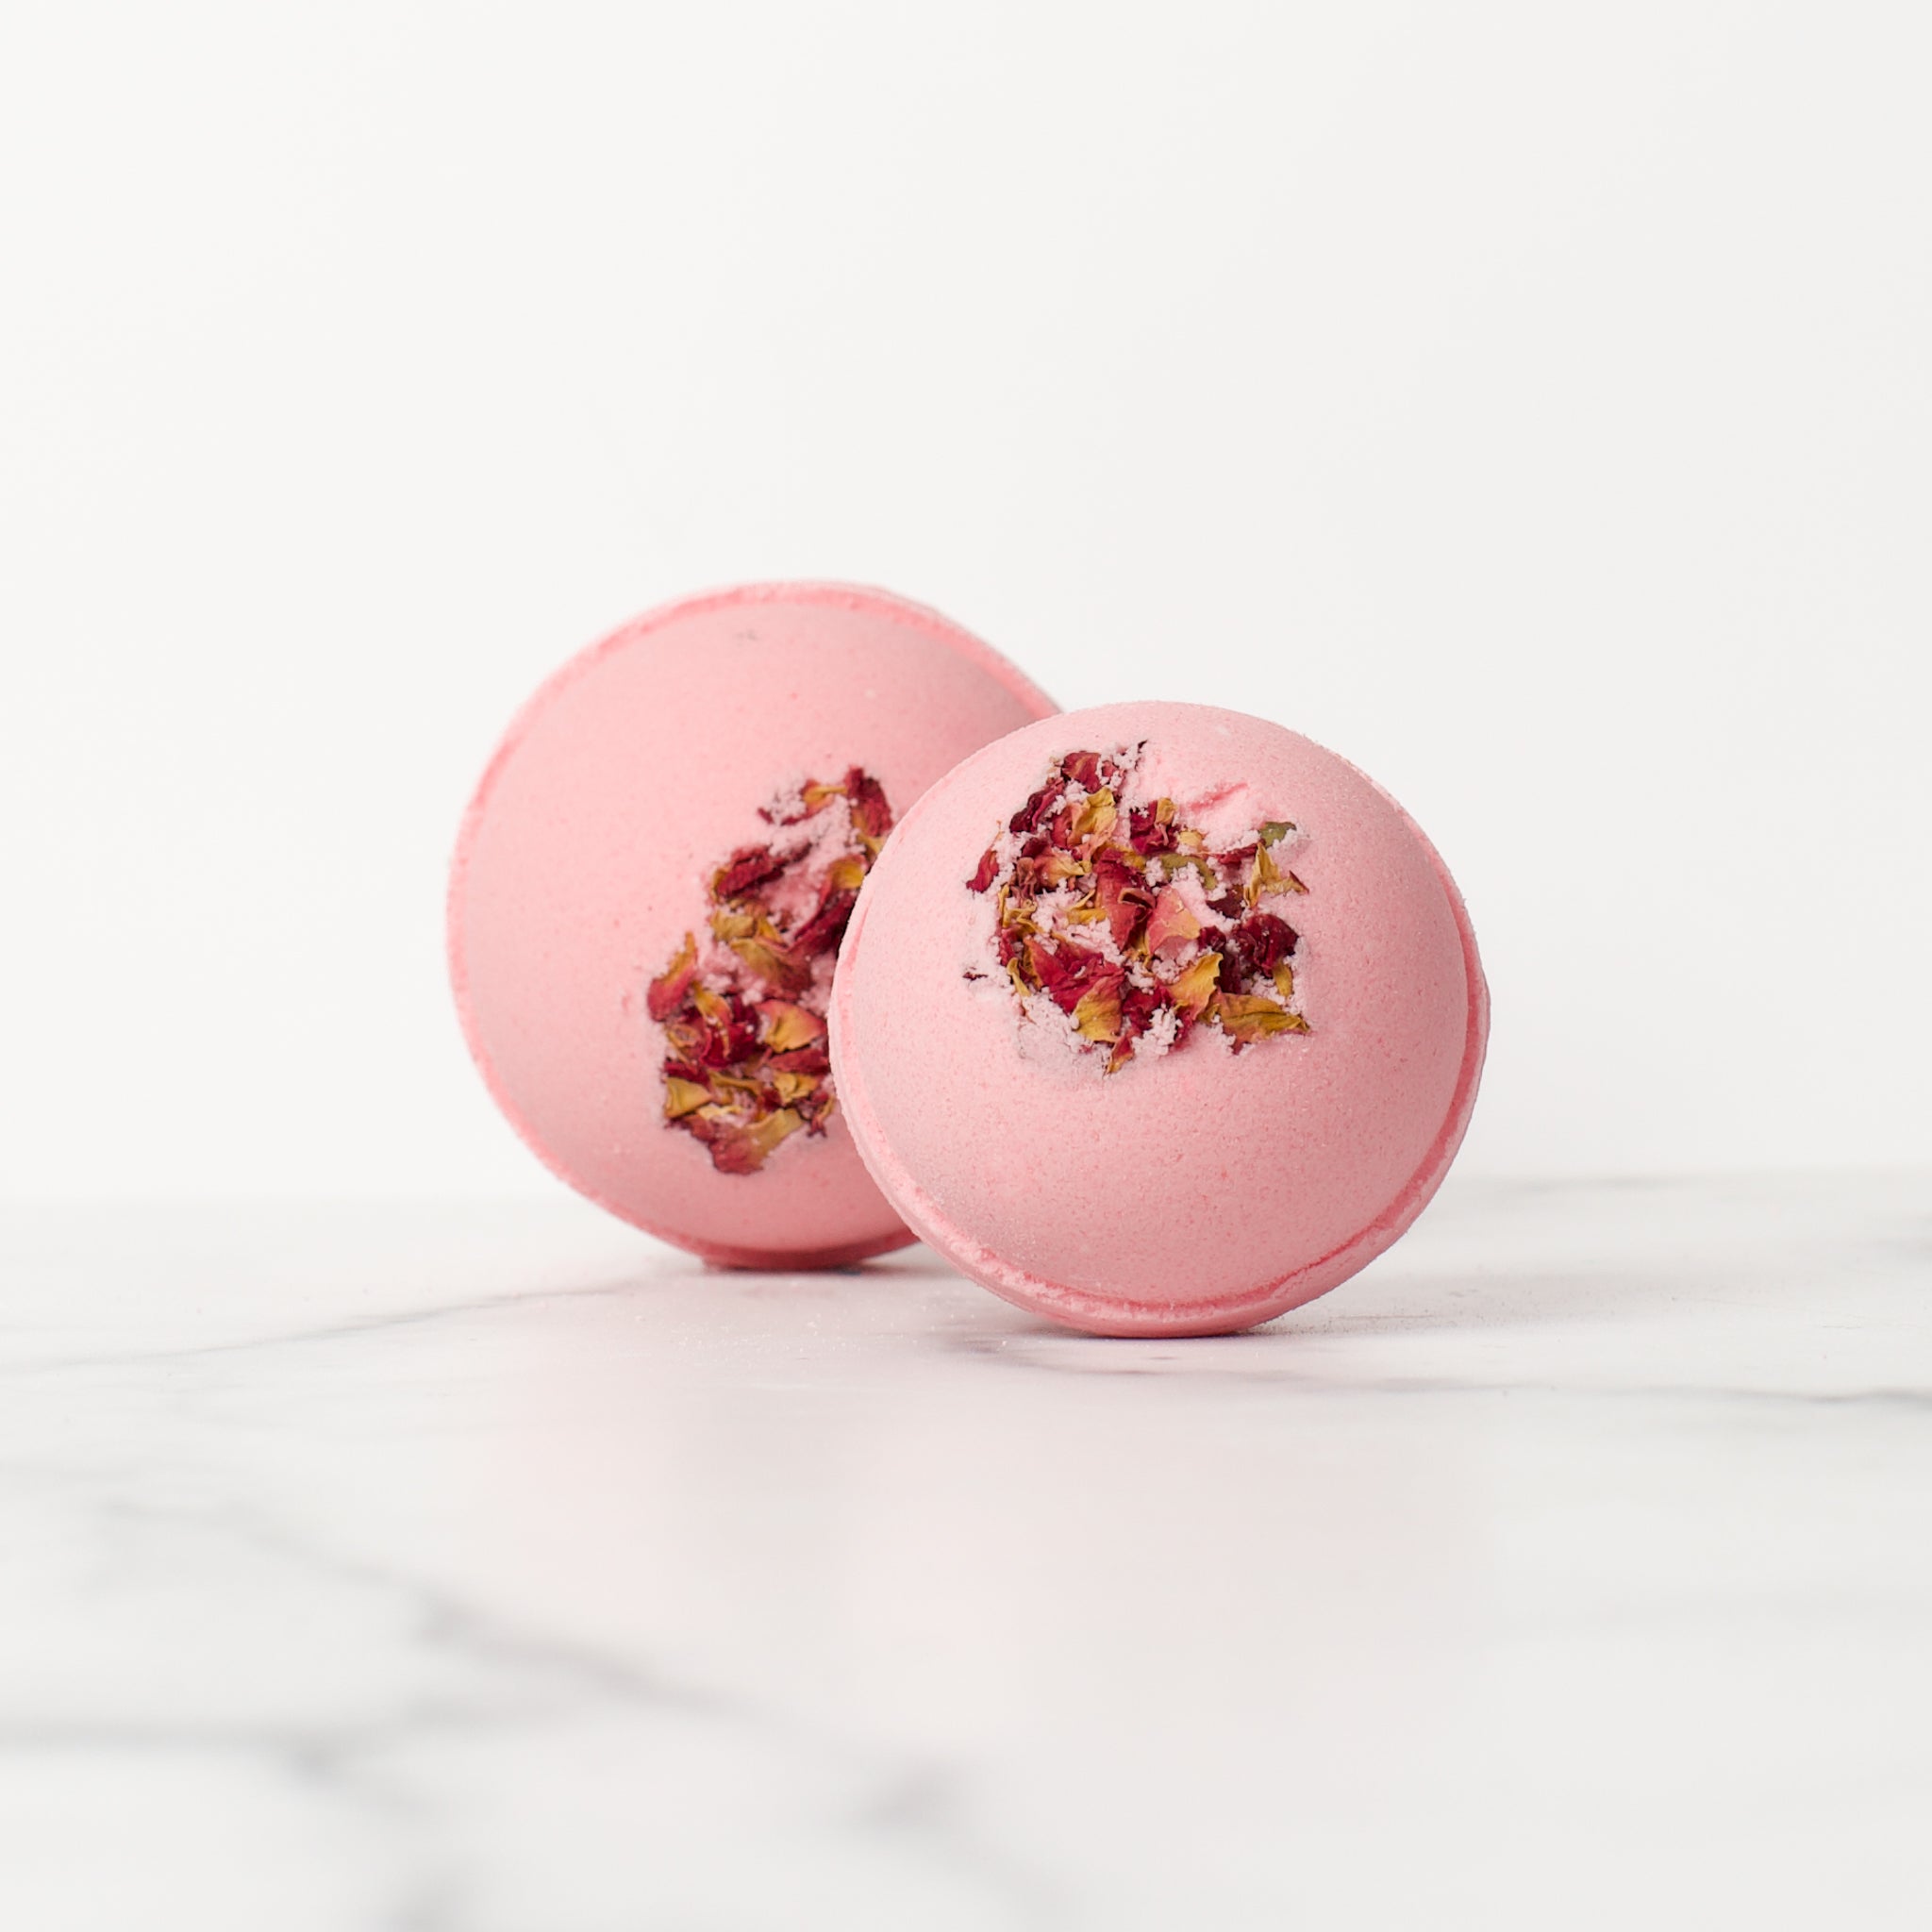 One large and one medium round Lemon Rose bath bombs on a white background. Lemon Rose is a light pink bath bomb with rose petals embedded on the top..